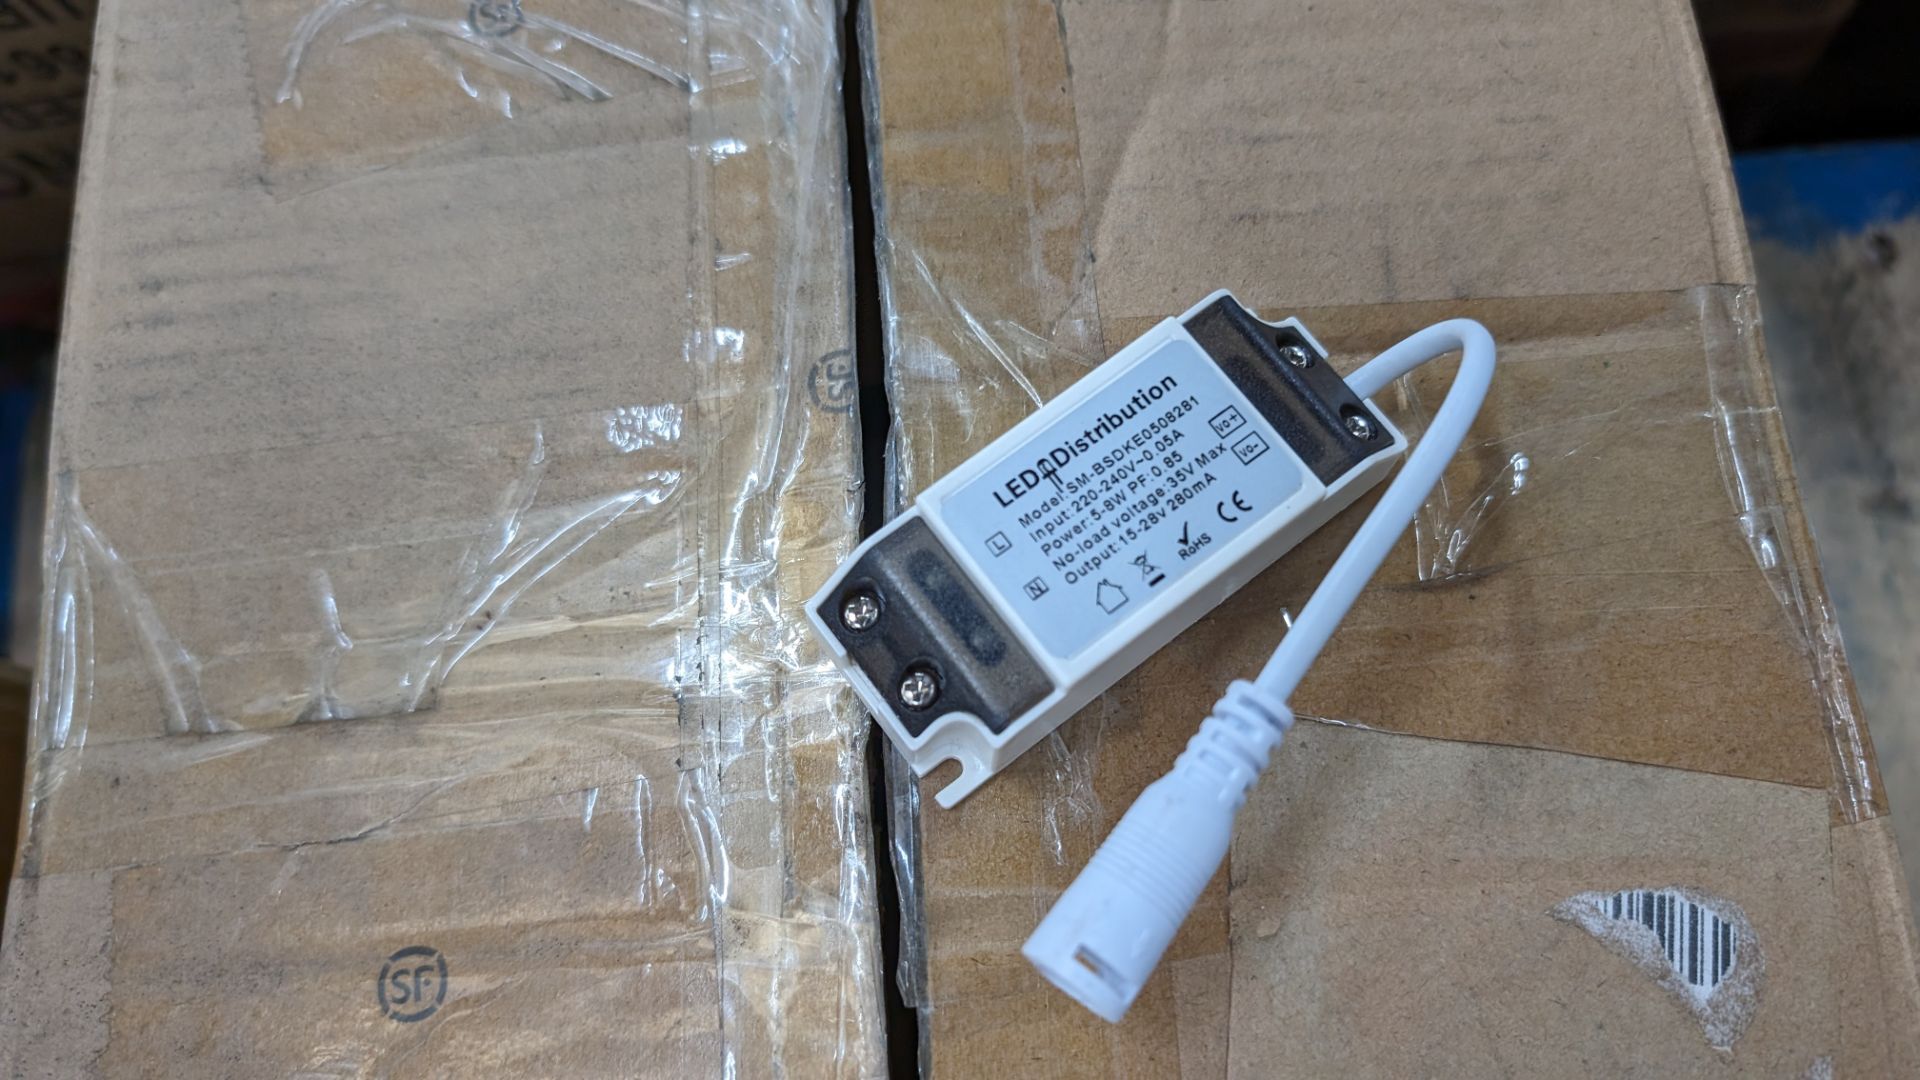 Approximately 59 off 5-8w LED drivers, output 15-28v - 1 carton - Image 3 of 5